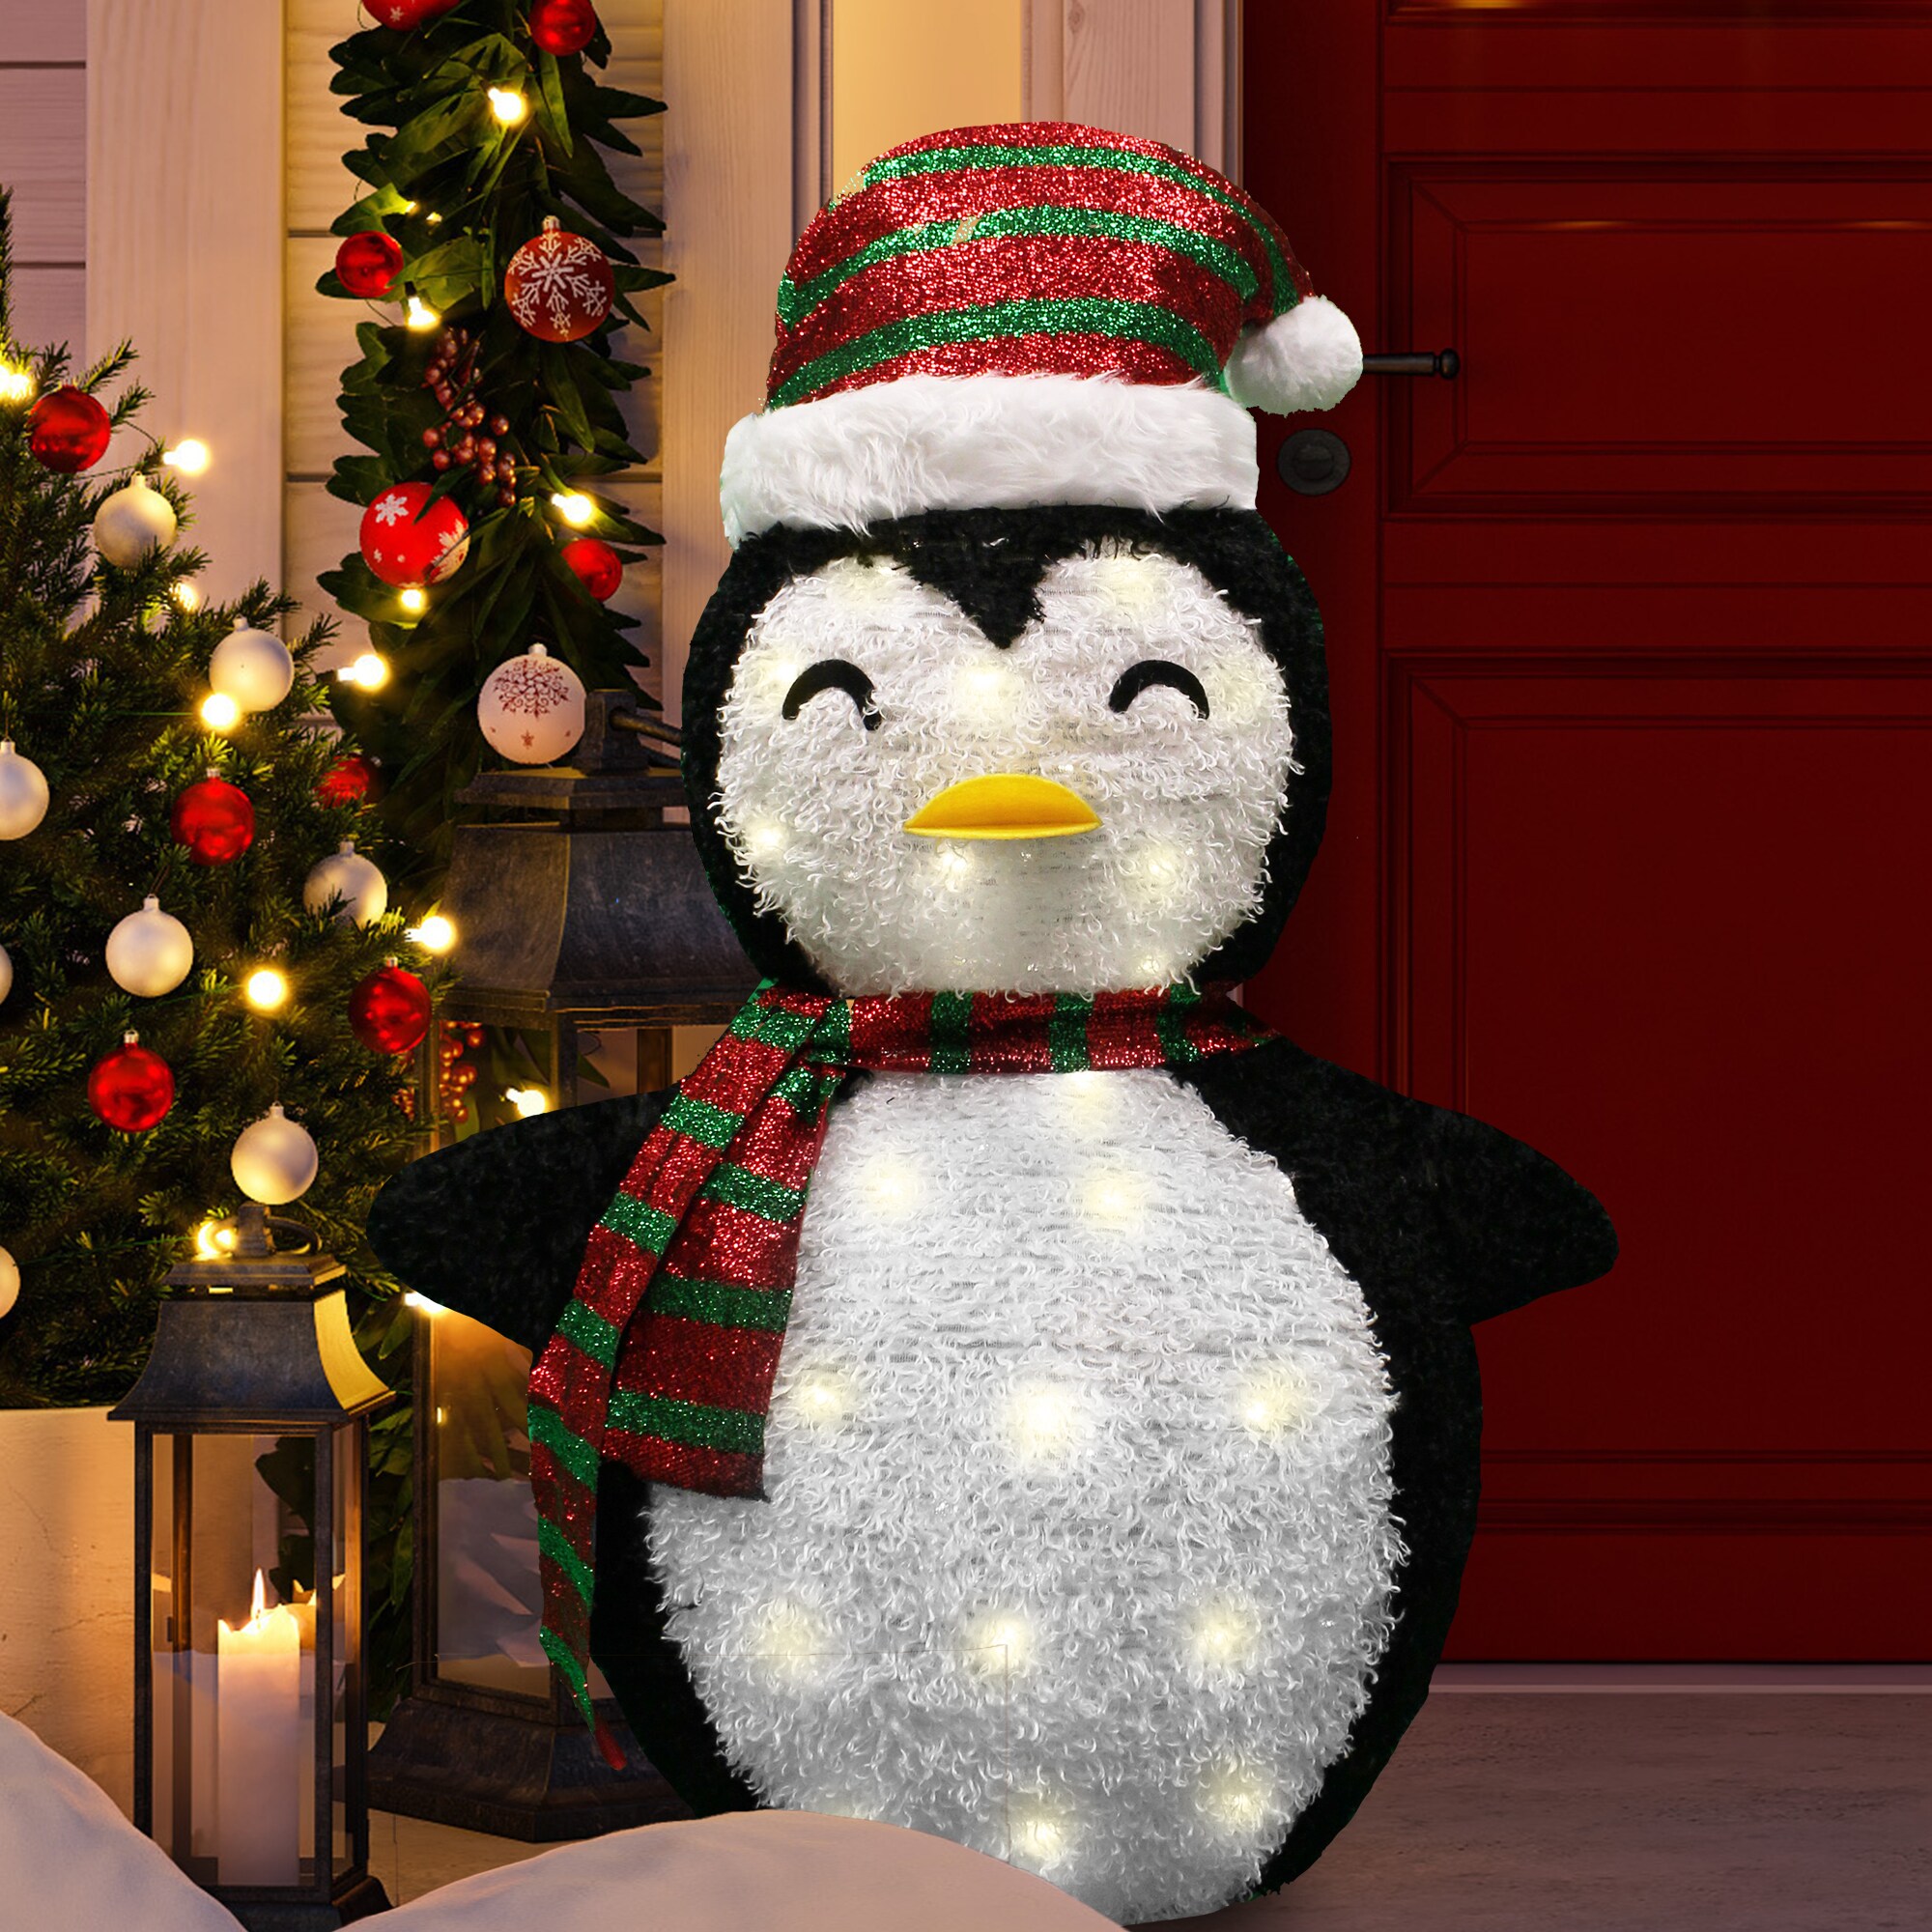 Christmas Event Decoration Joiedomi 21in Tinsel Penguin LED Yard Light for Christmas Outdoor Yard Garden Decorations Christmas Eve Night Decor 